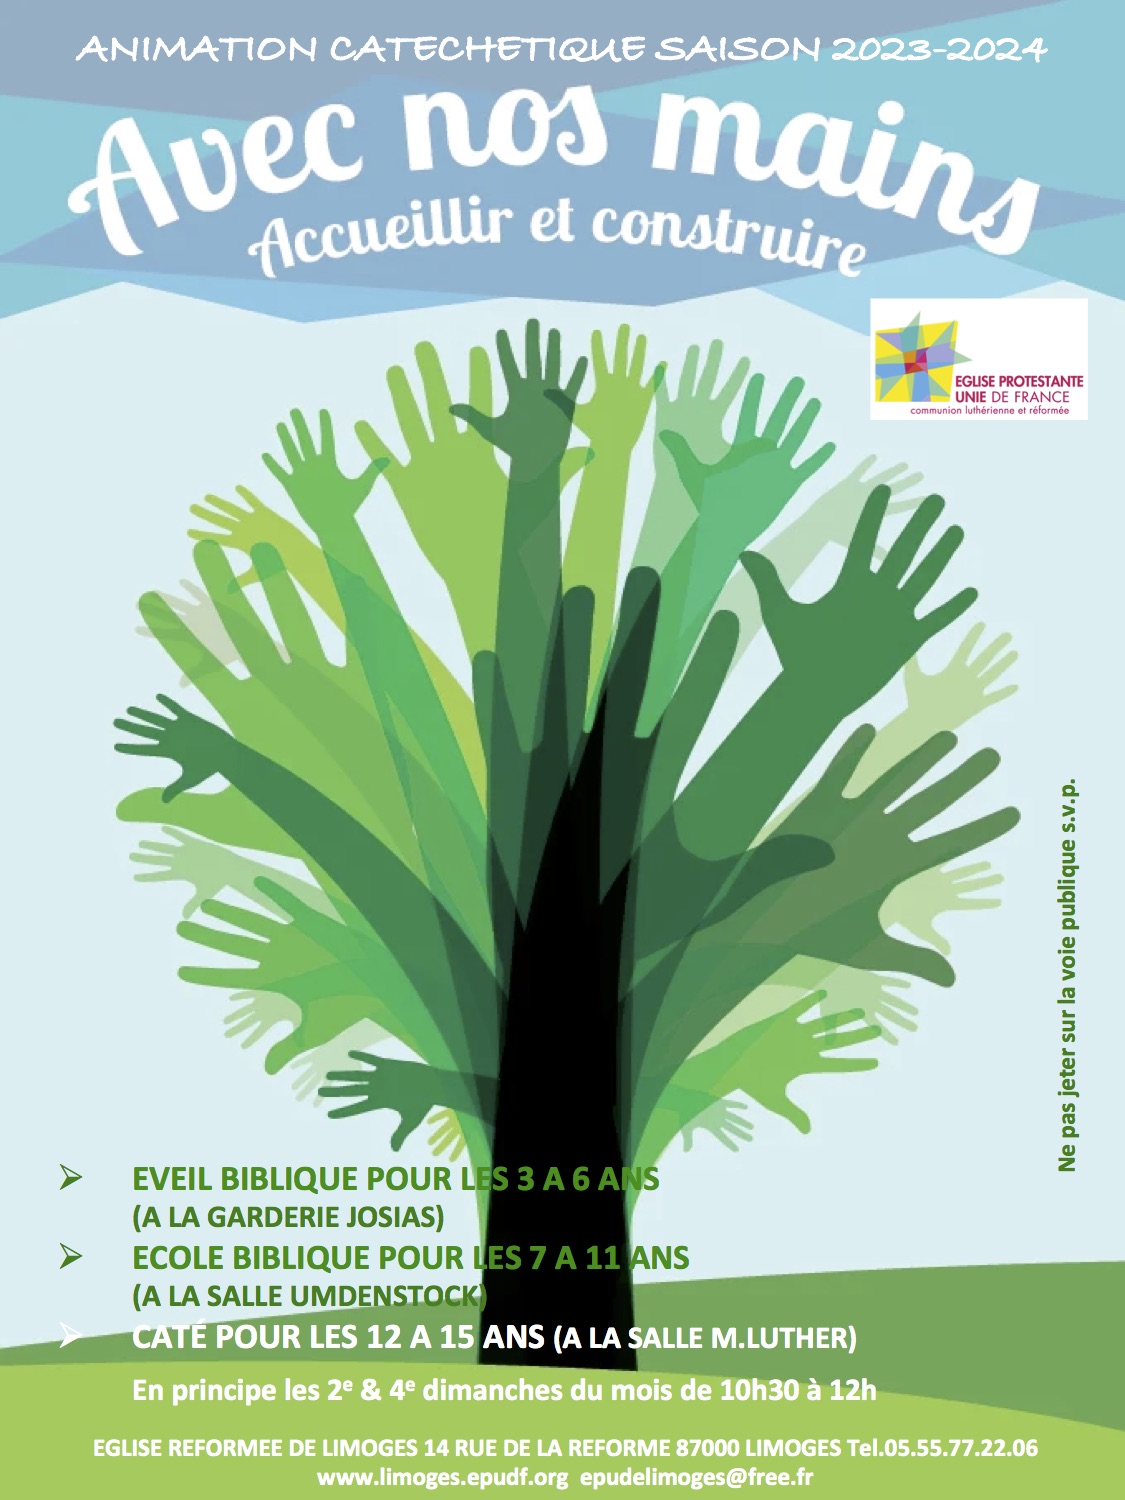 https://limoges.epudf.org/wp-content/uploads/sites/100/2021/01/Affiche-catechese-2023-2024.jpg